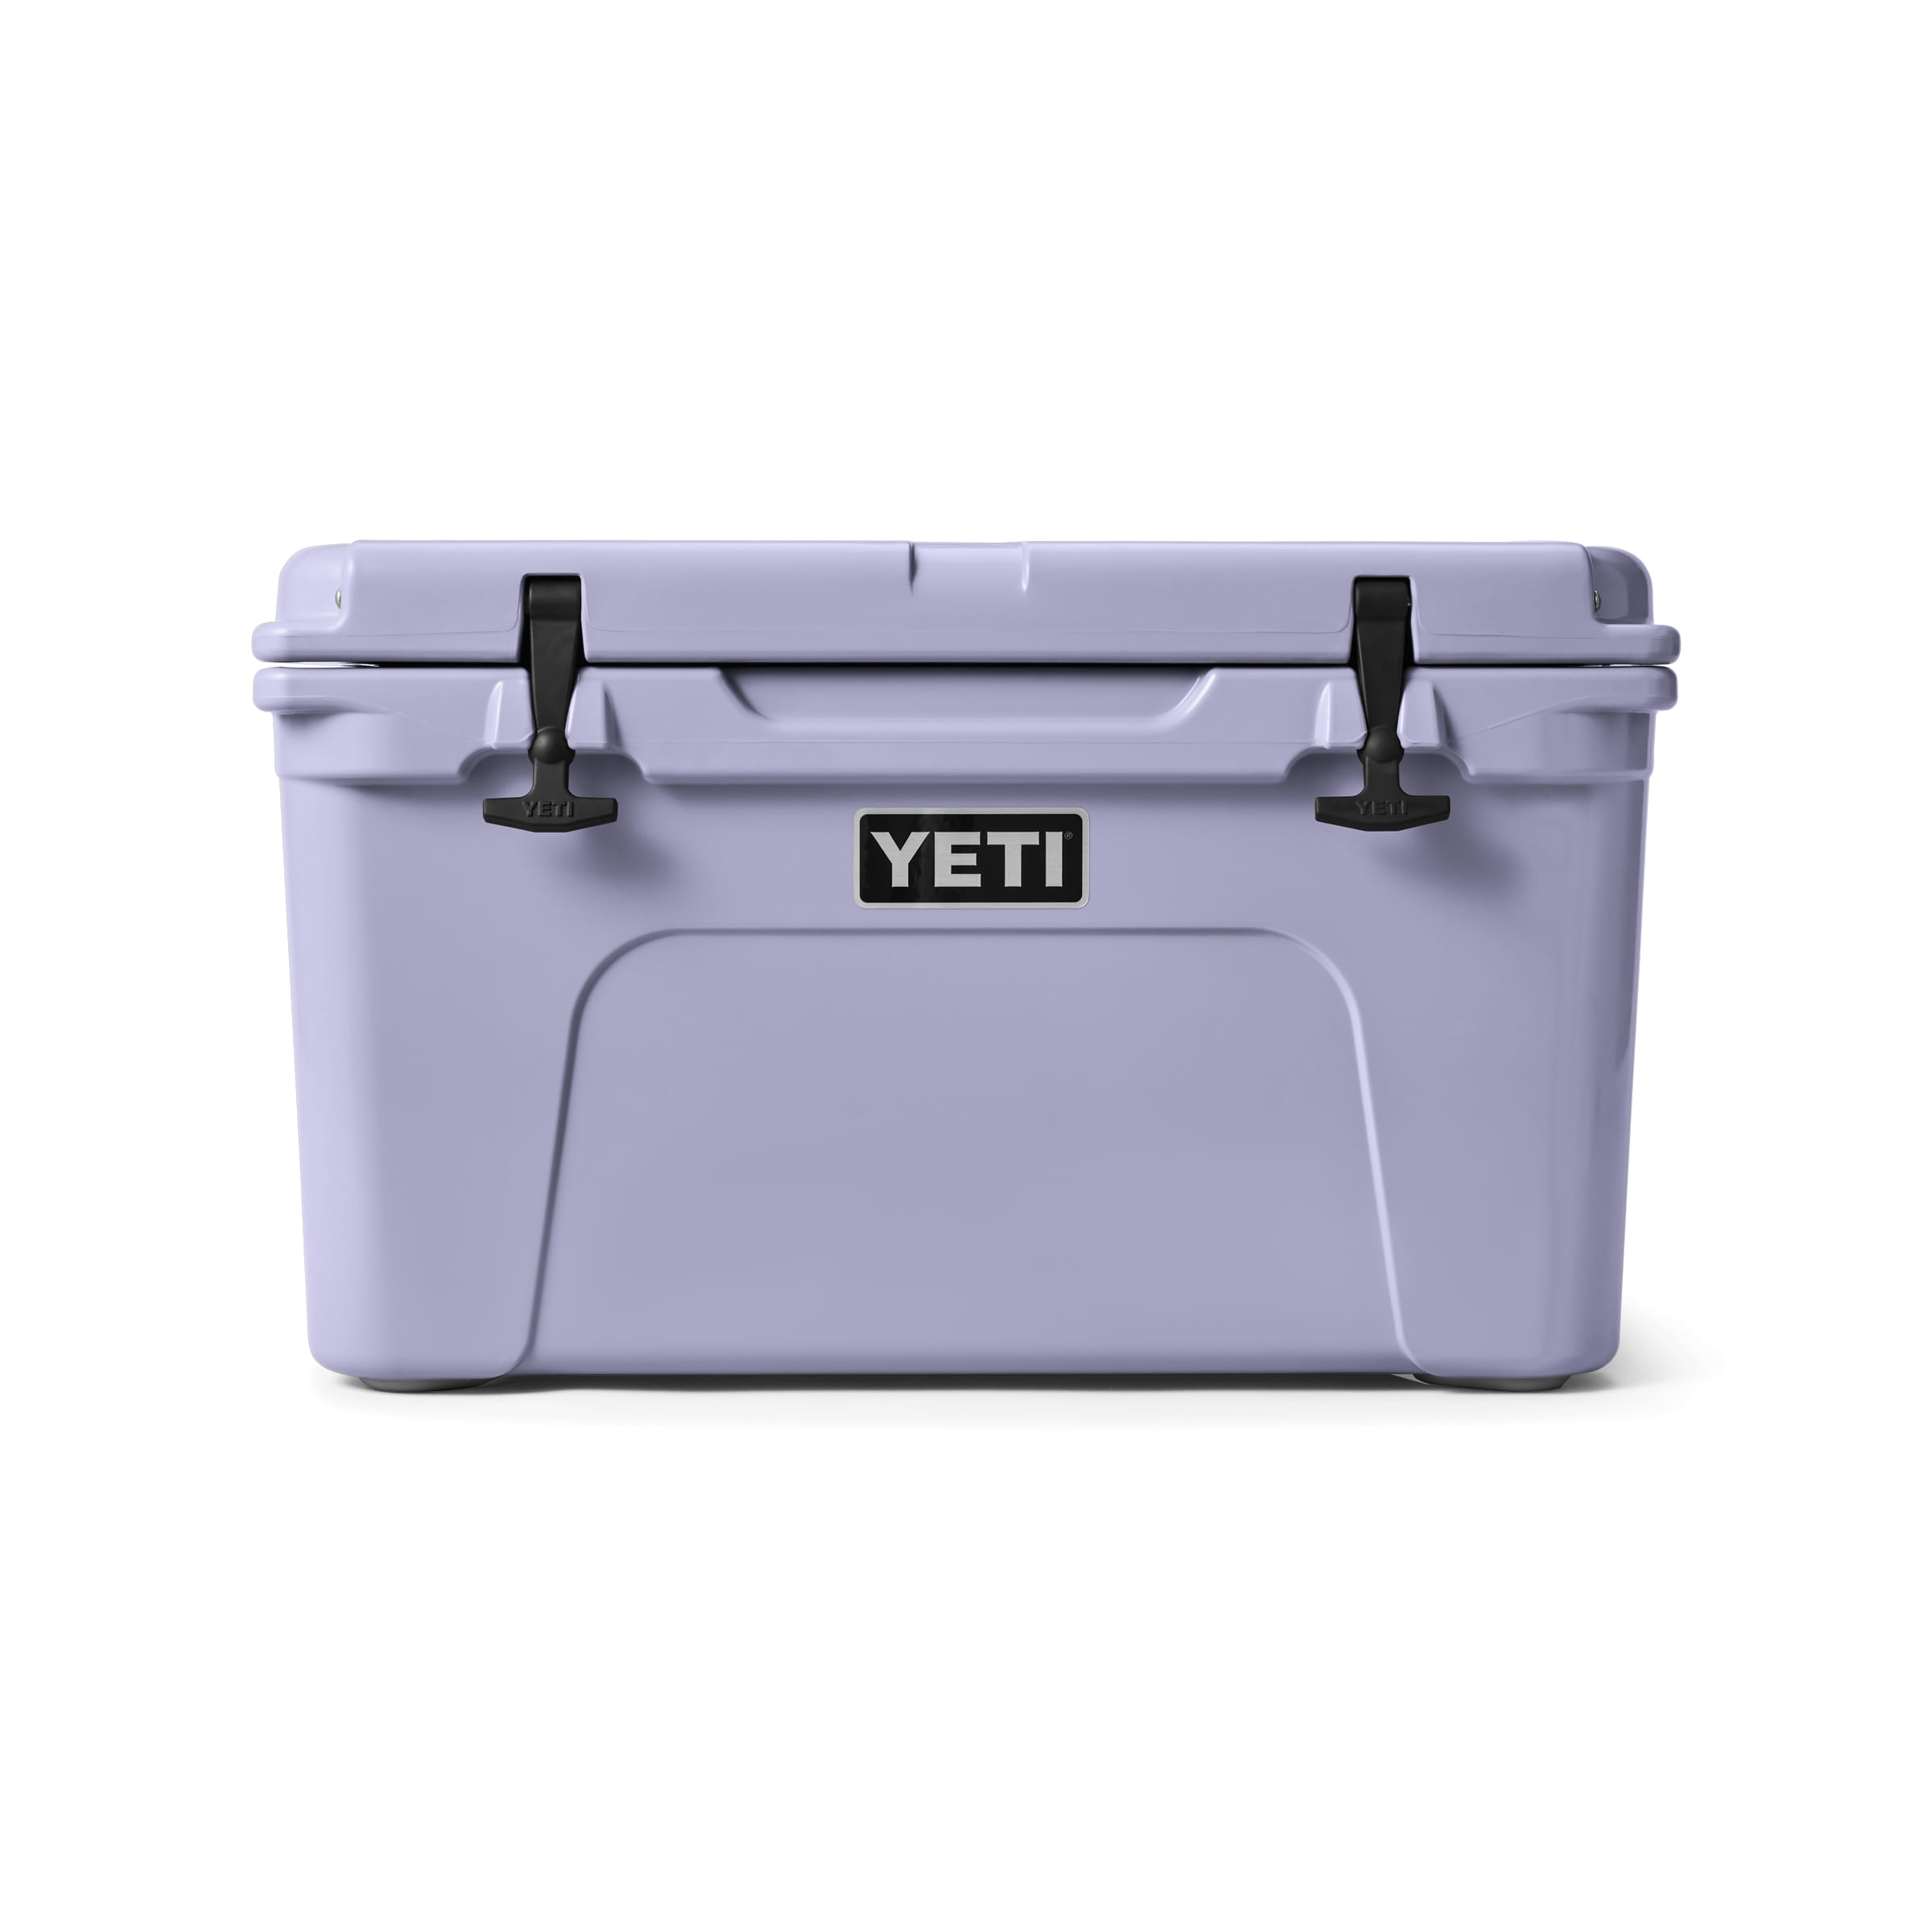 Yeti Coolers Tundra 45 Series Cooler